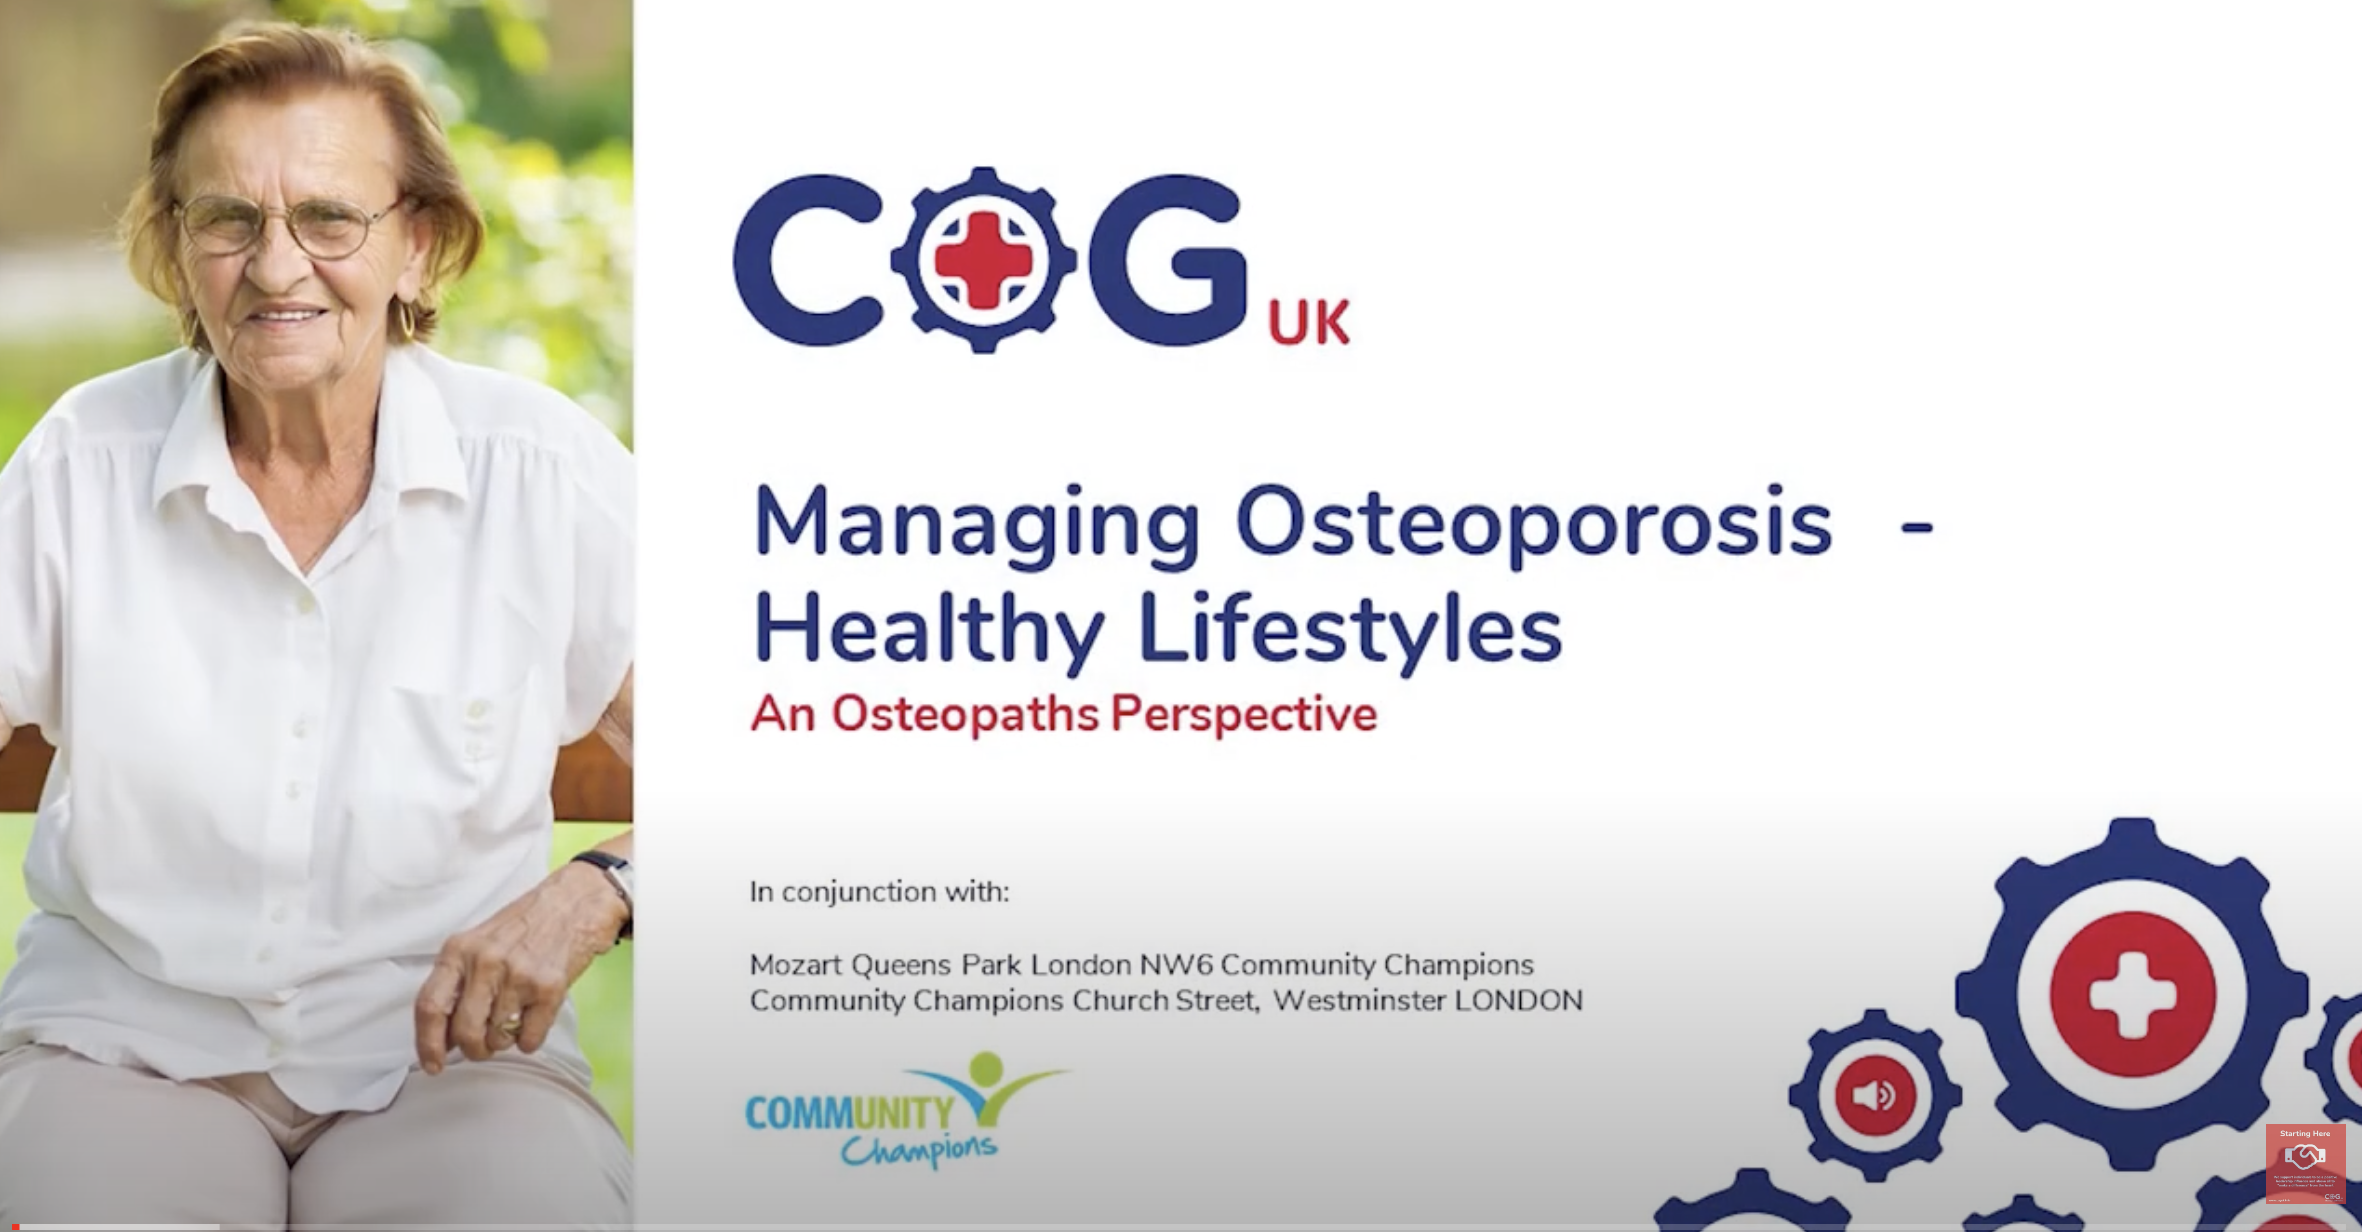 Have You Ever Considered How A Healthy Lifestyle Can Help With Your Osteoporosis?